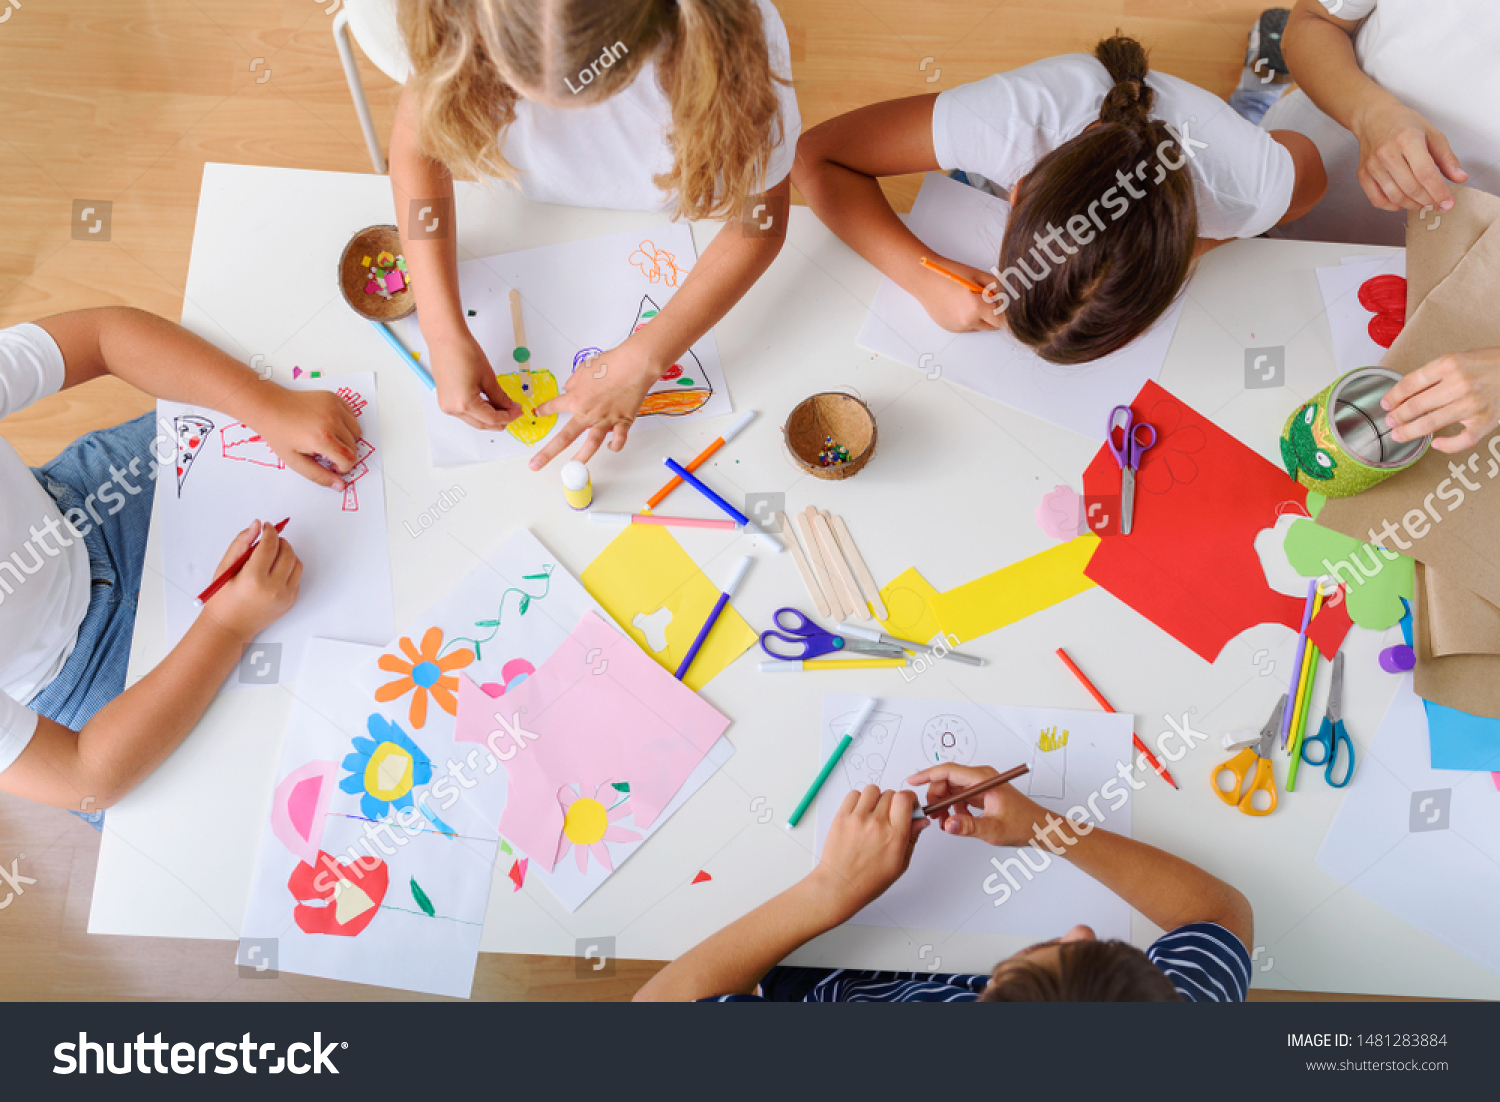 Creative kids. Creative Arts and Crafts Classes in After School Activities. #1481283884